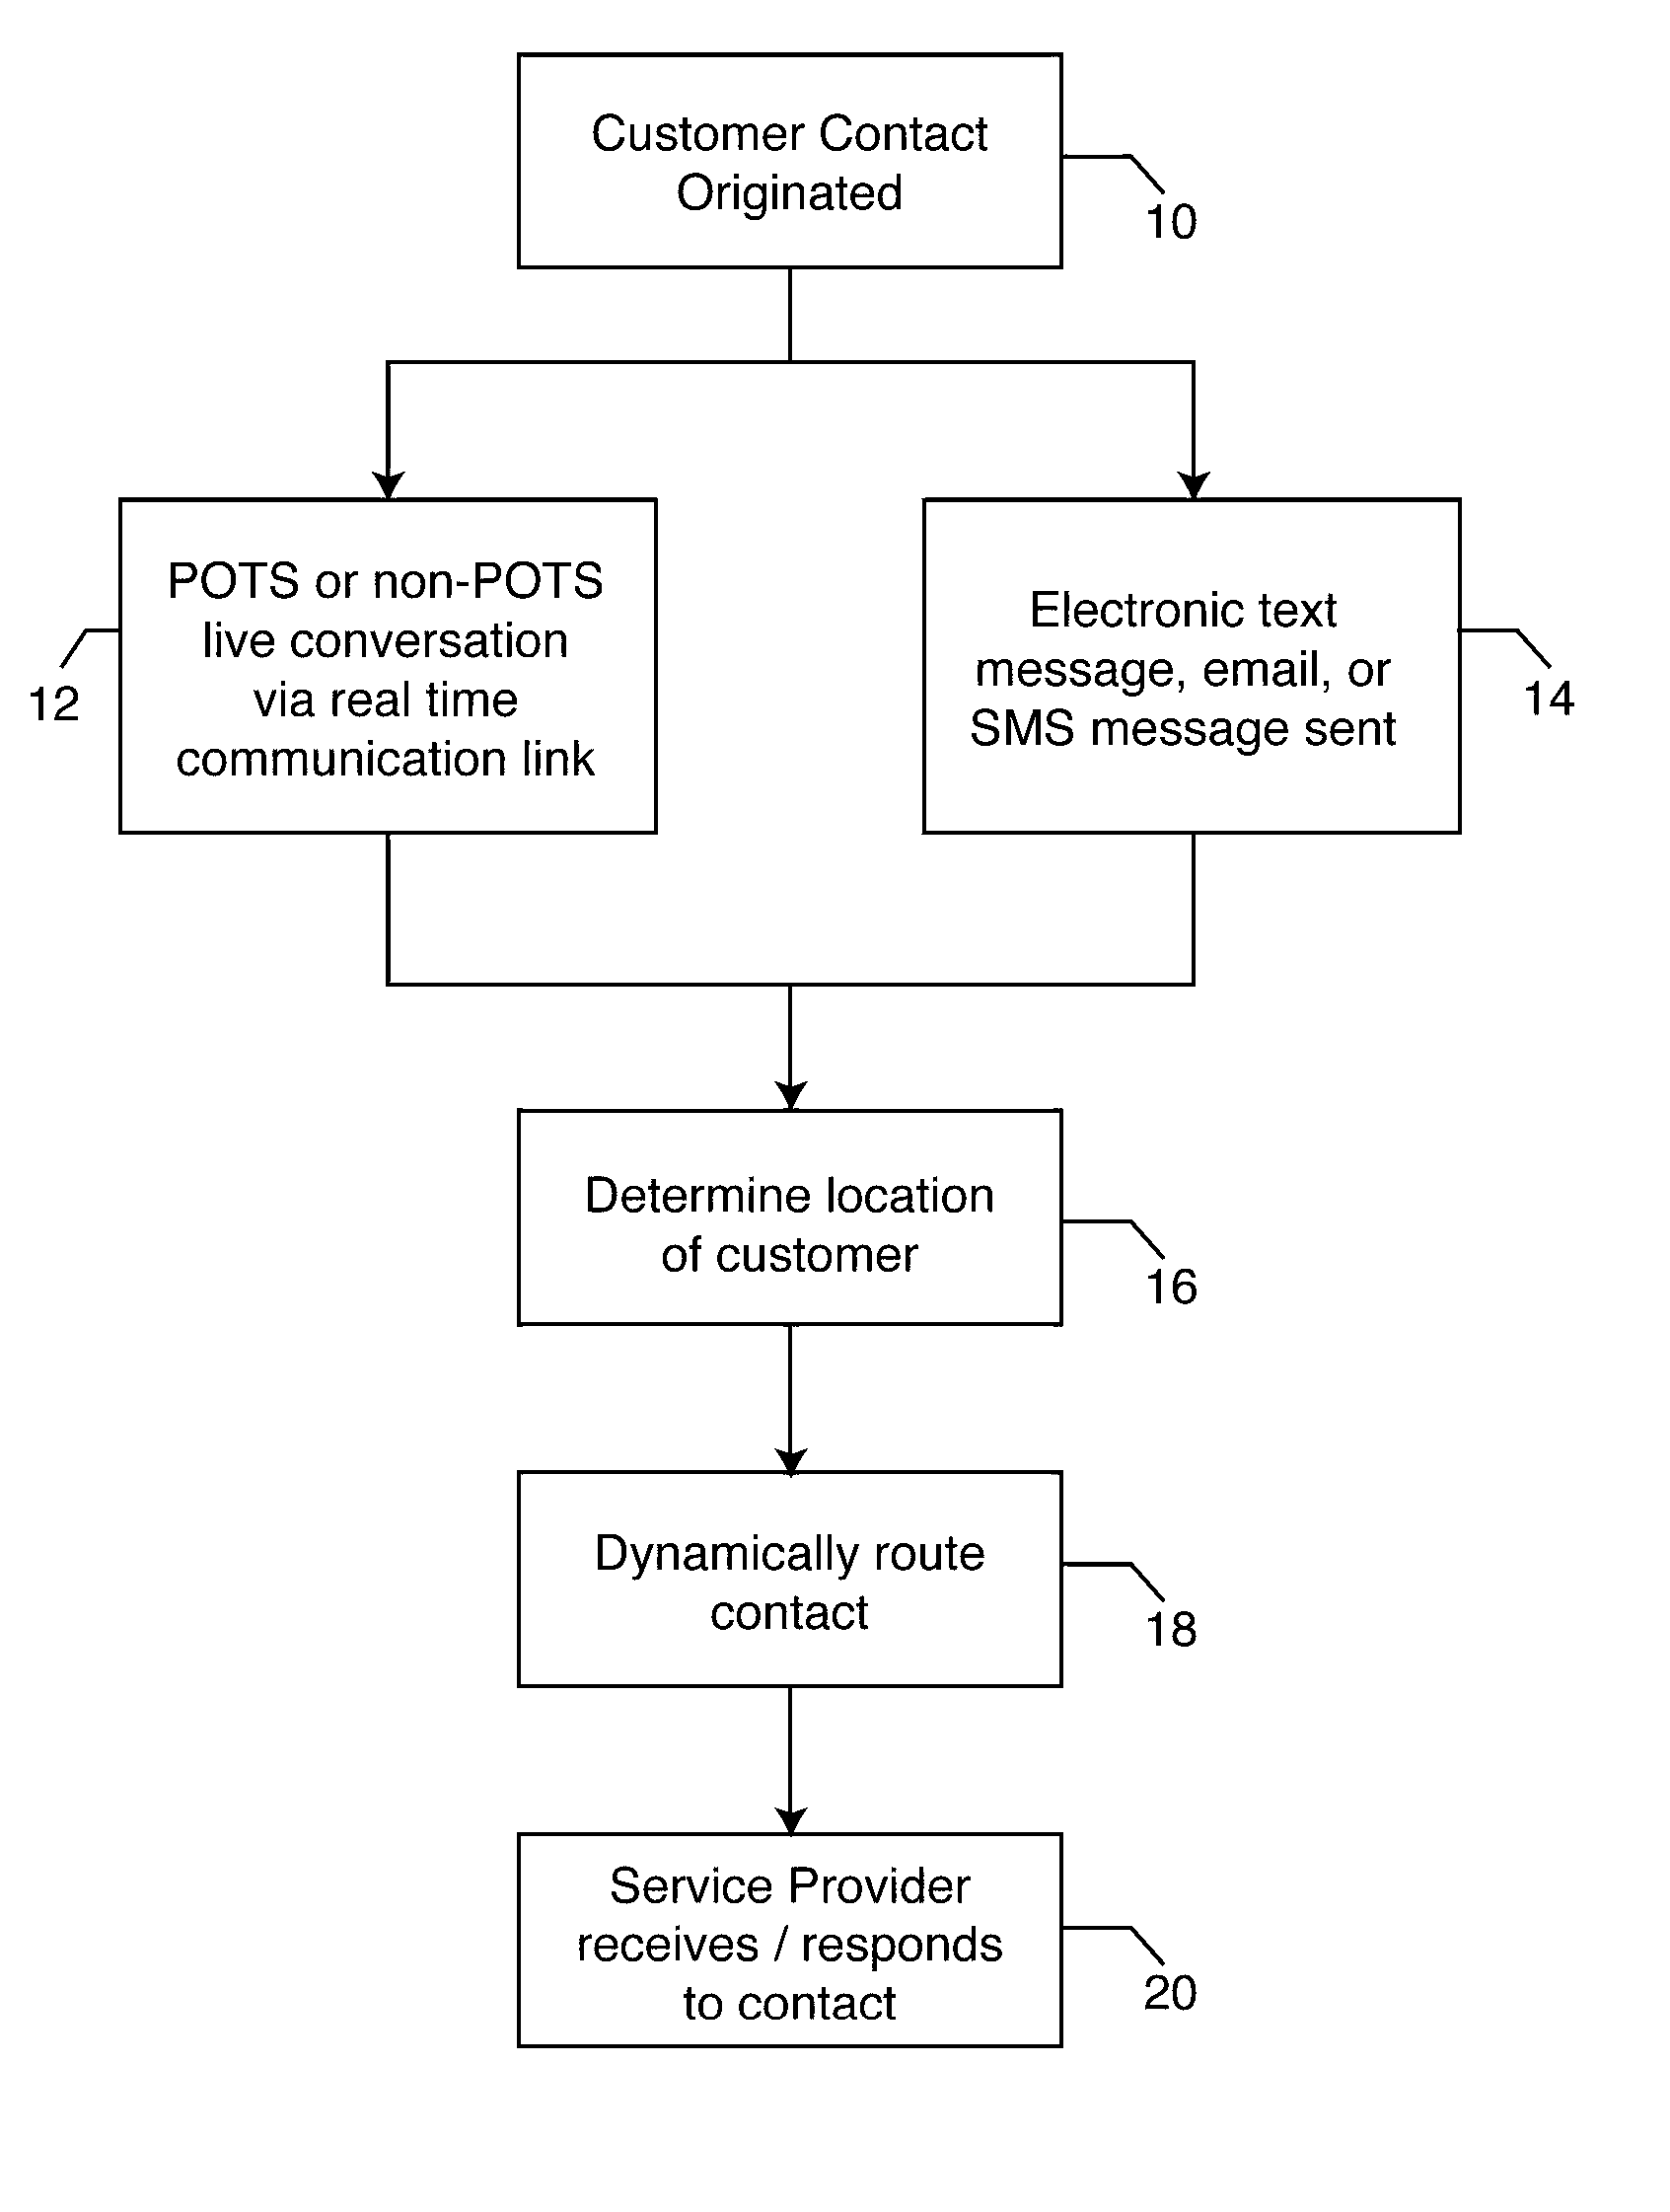 Process for dynamic routing of customer contacts to service providers in real time